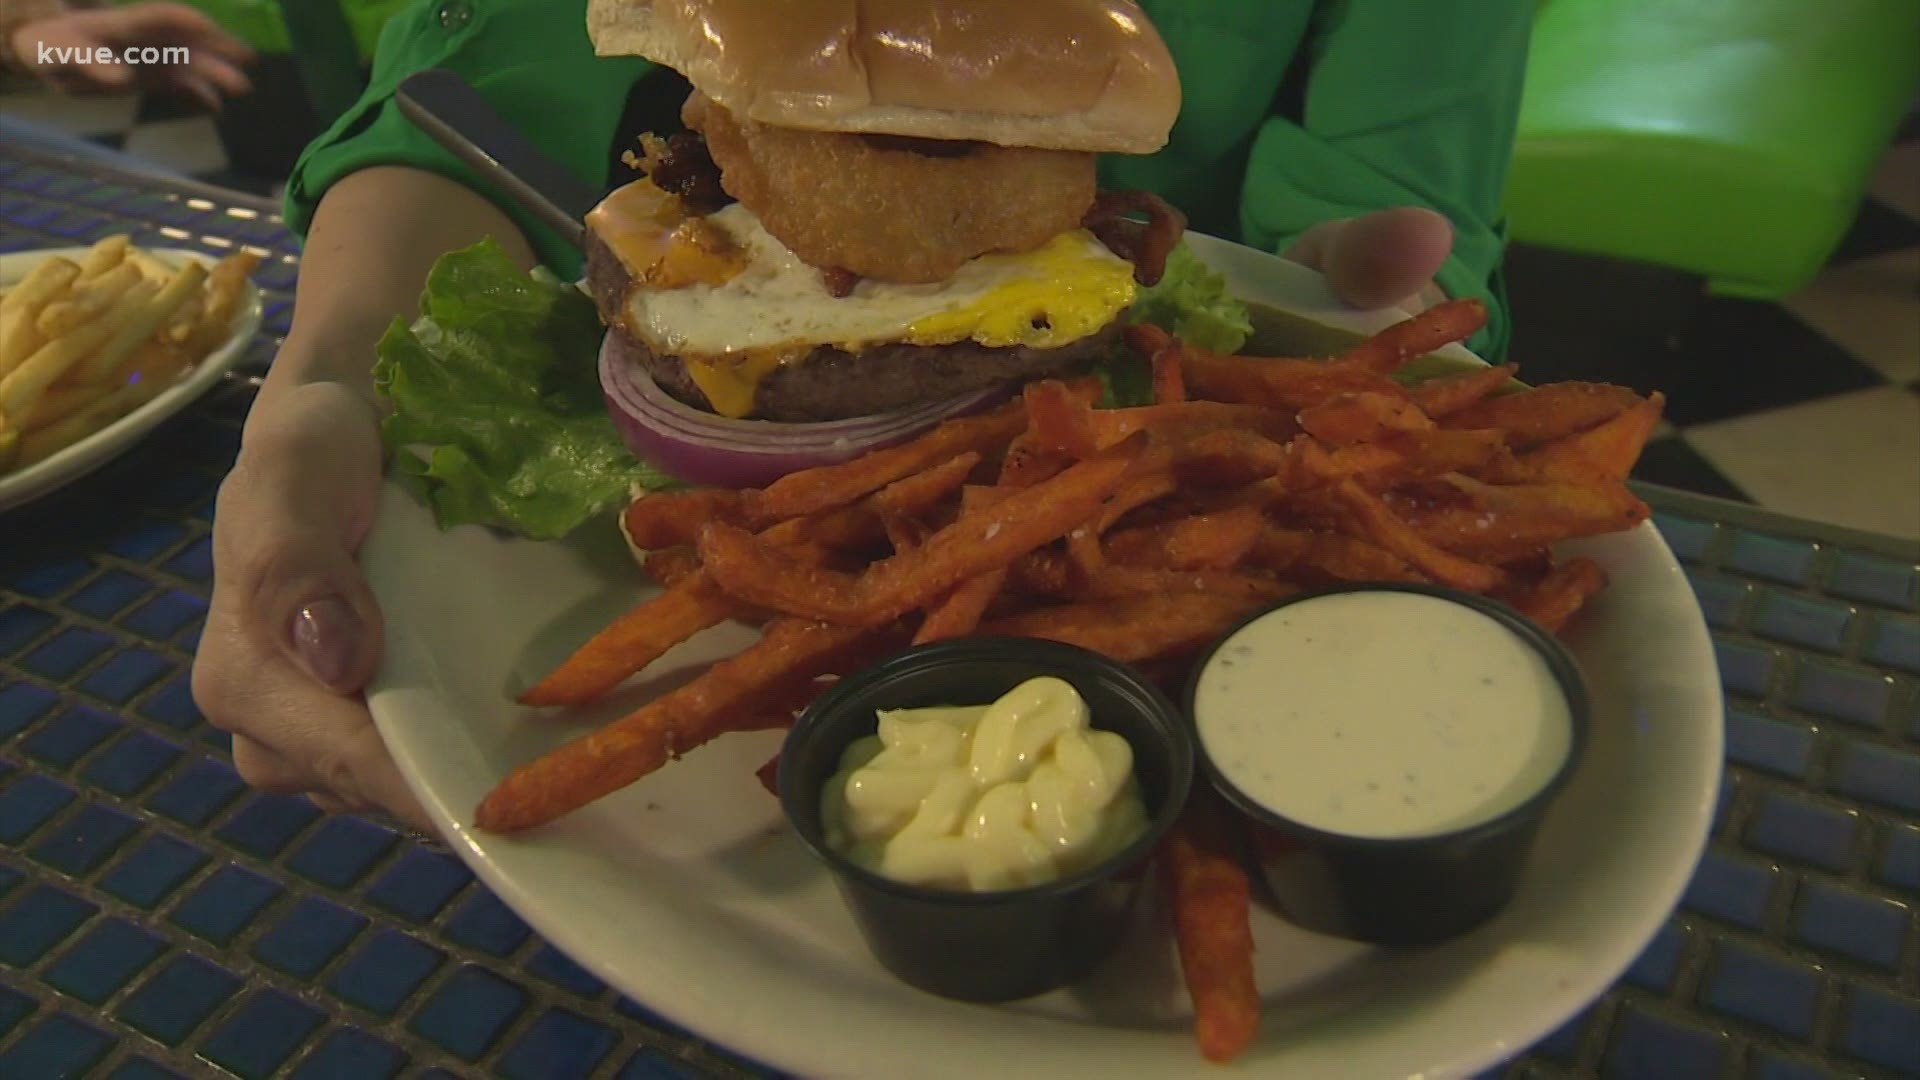 In this installment of Keep Austin Local, KVUE Cultural Reporter Brittany Flowers stopped by Stars Cafe. The diner has been around for more than 50 years.